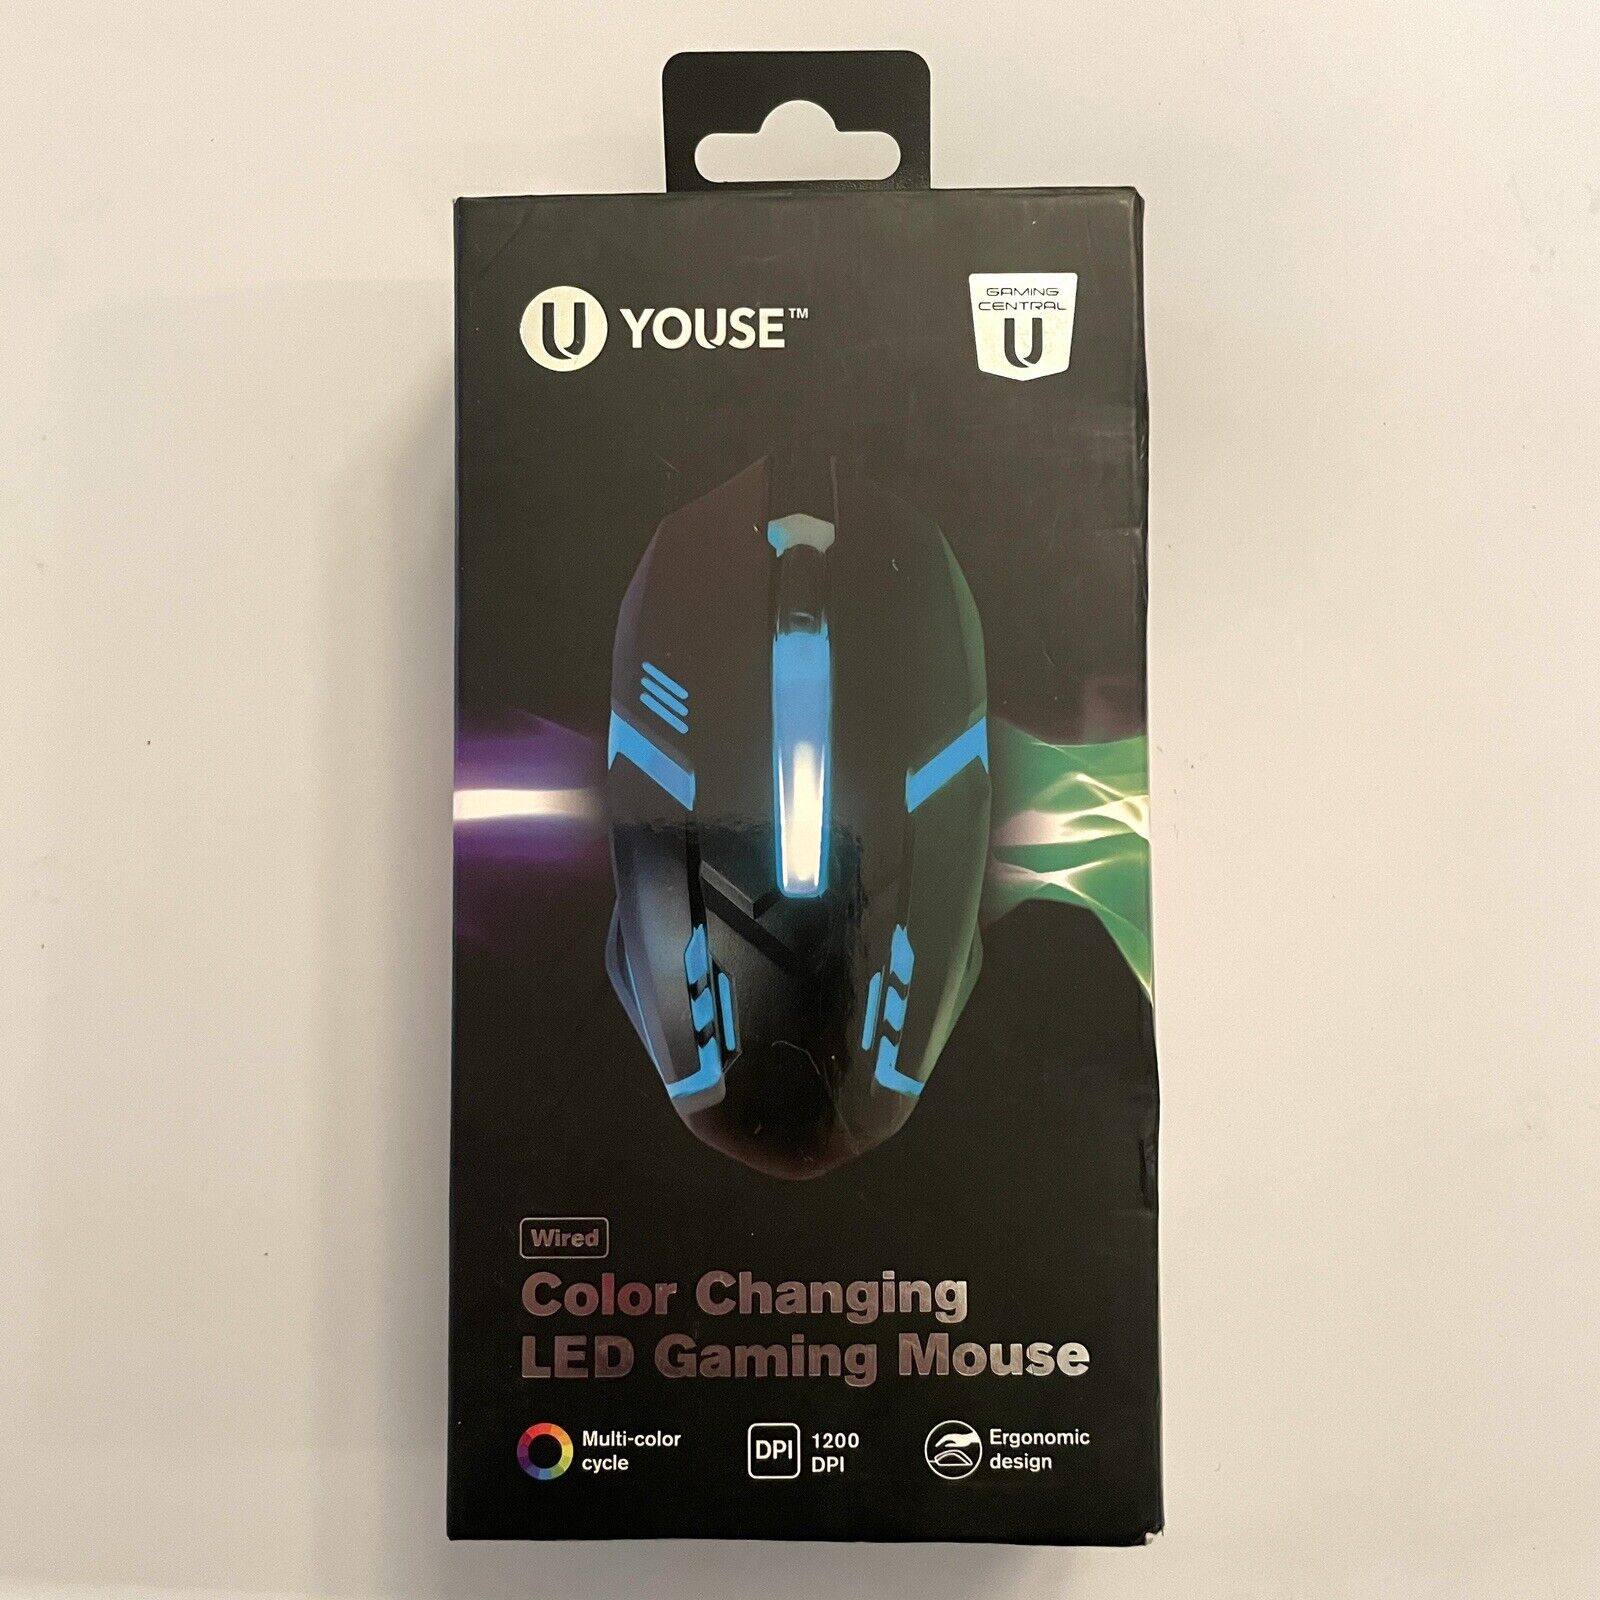 U YOUSE Wired  Color Changing LED Gaming  Mouse  NEW Open Box Laptop Desktop